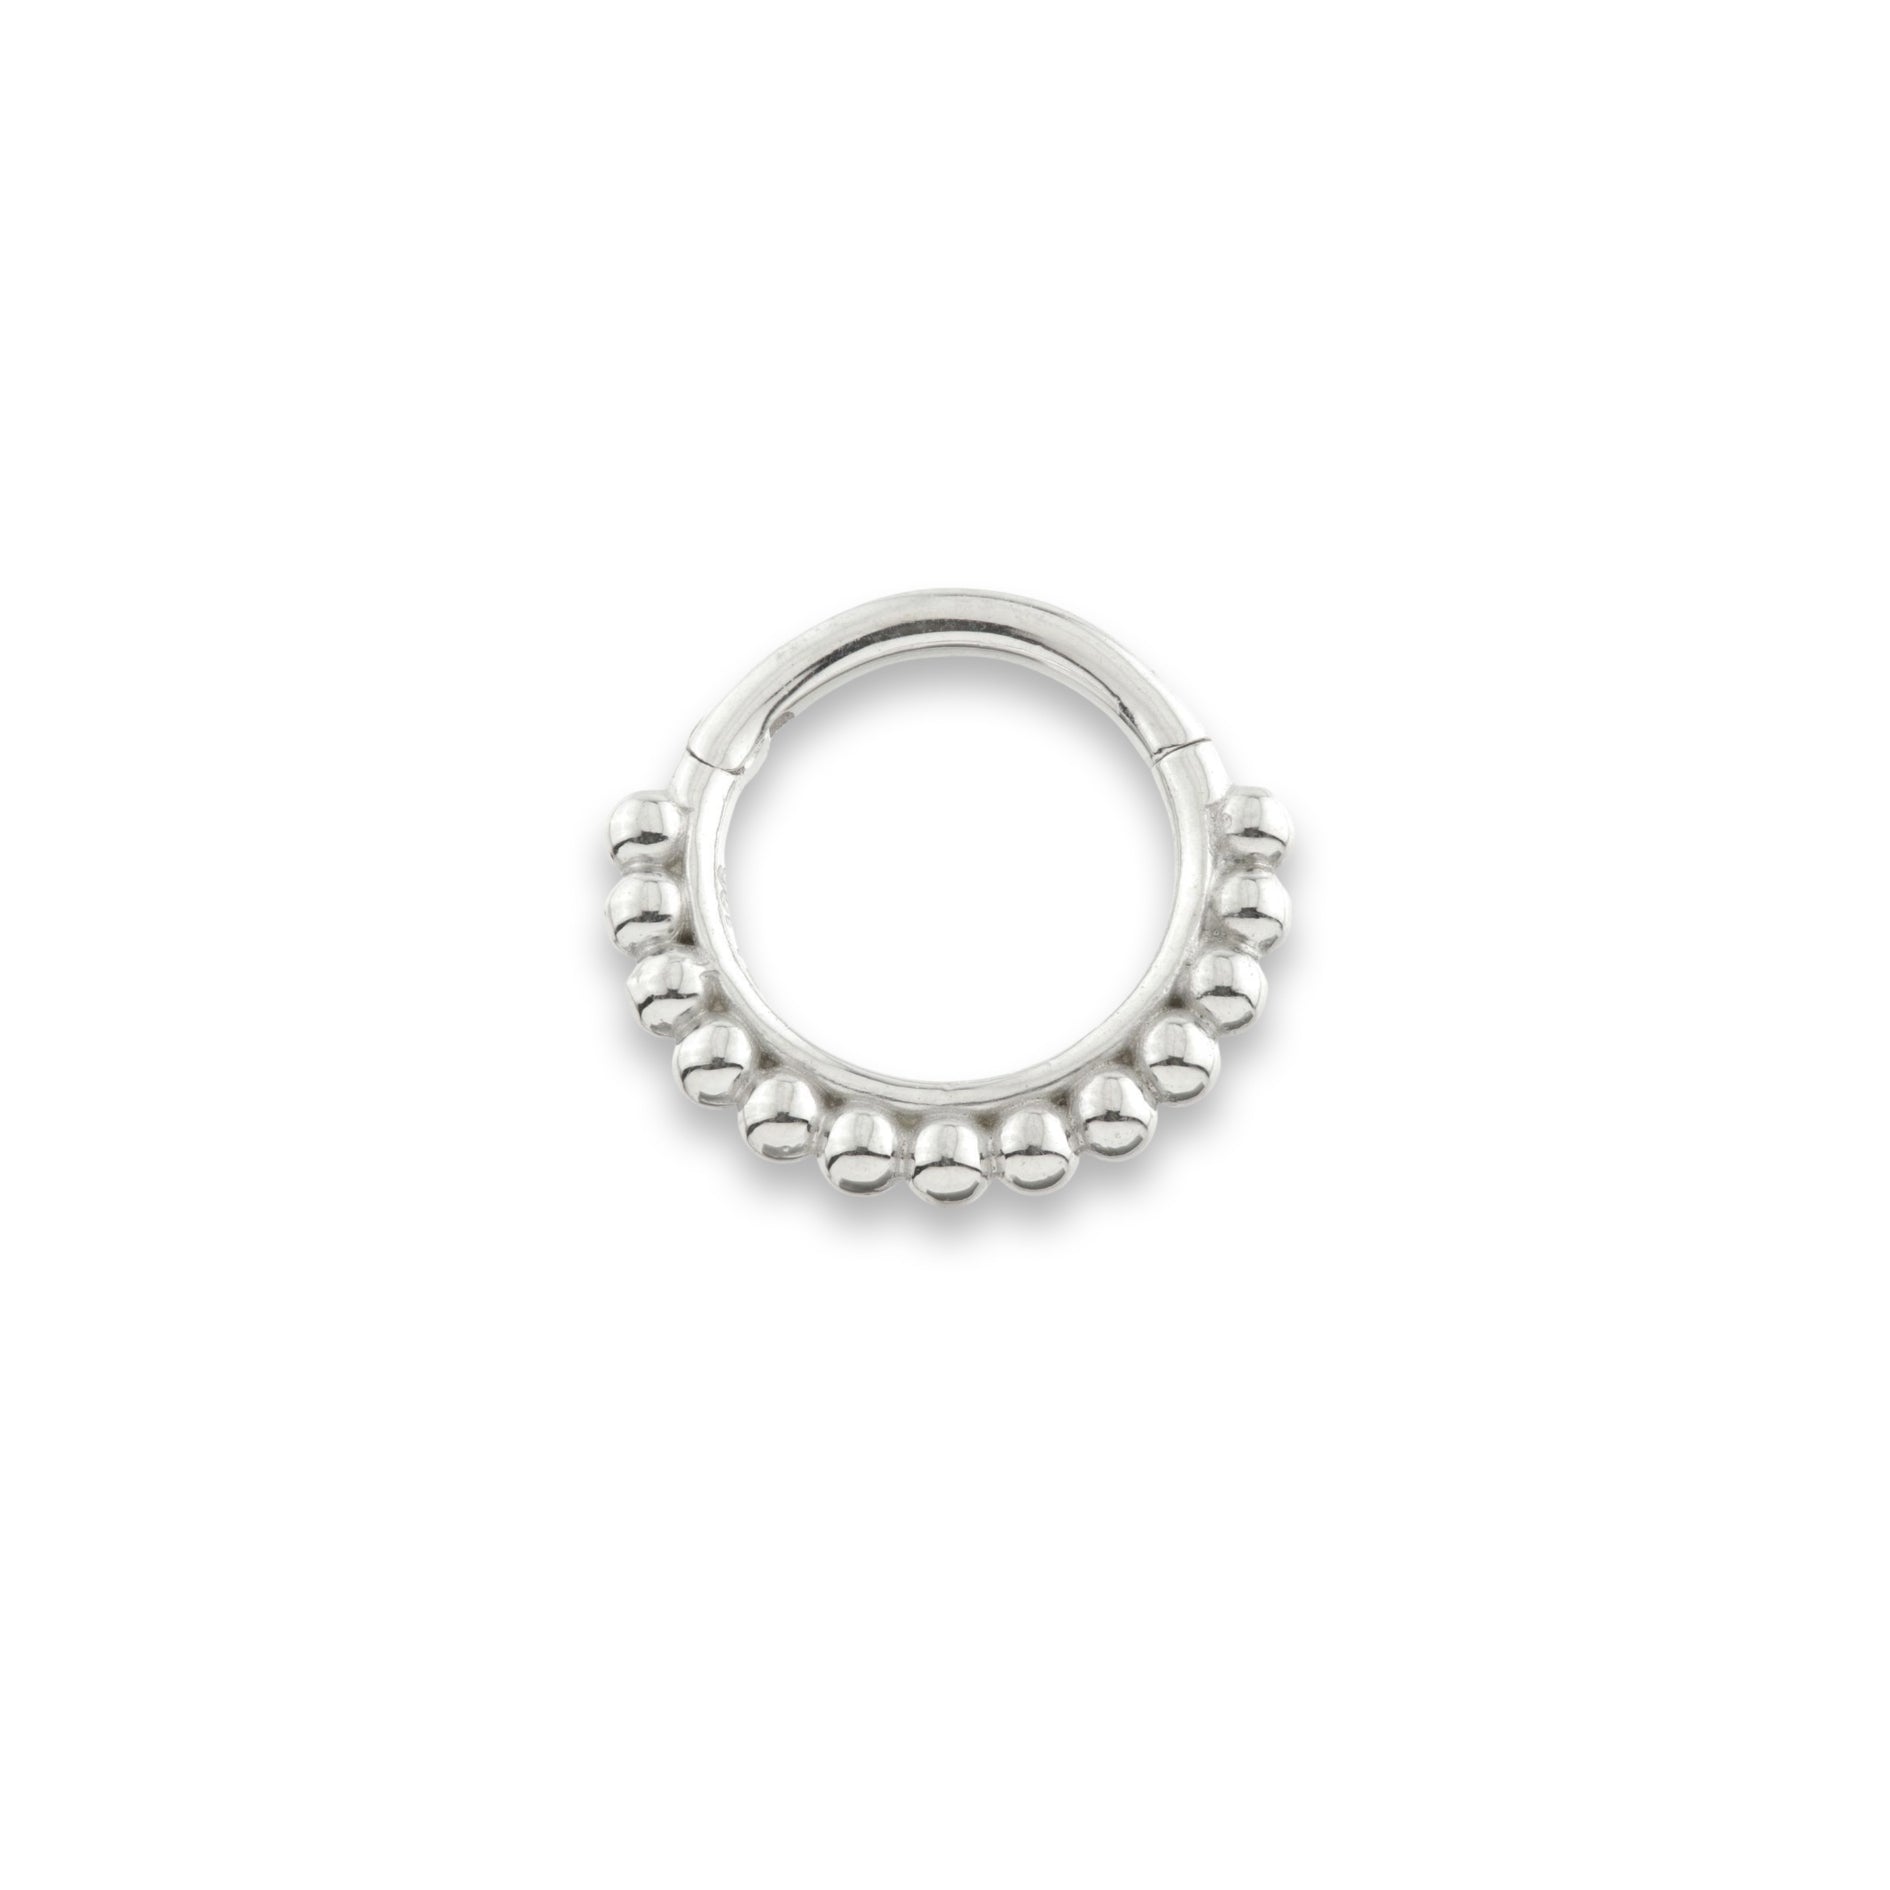 Boules 9k solid white gold bubble framed hinged single segment earring - Helix & Conch